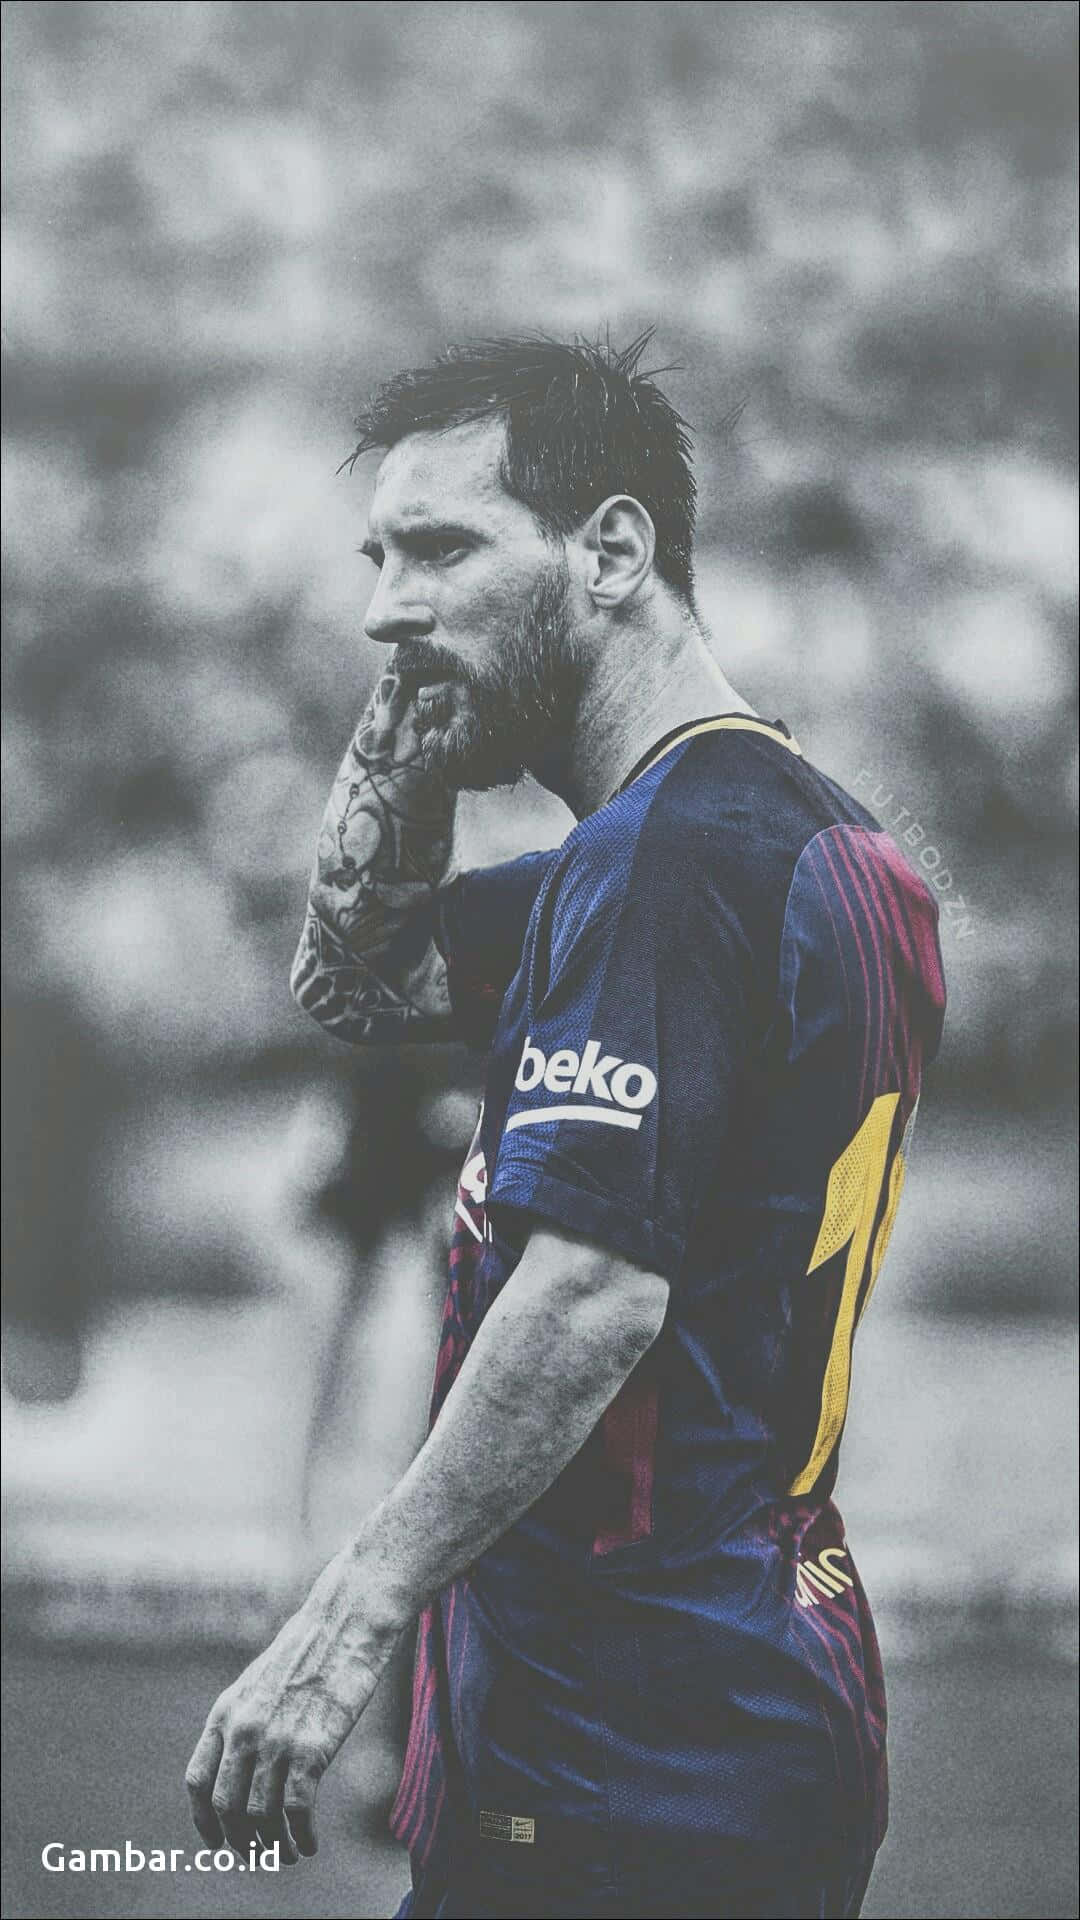 "stay Up To Date With The Latest Technology: The Messi Iphone" Wallpaper